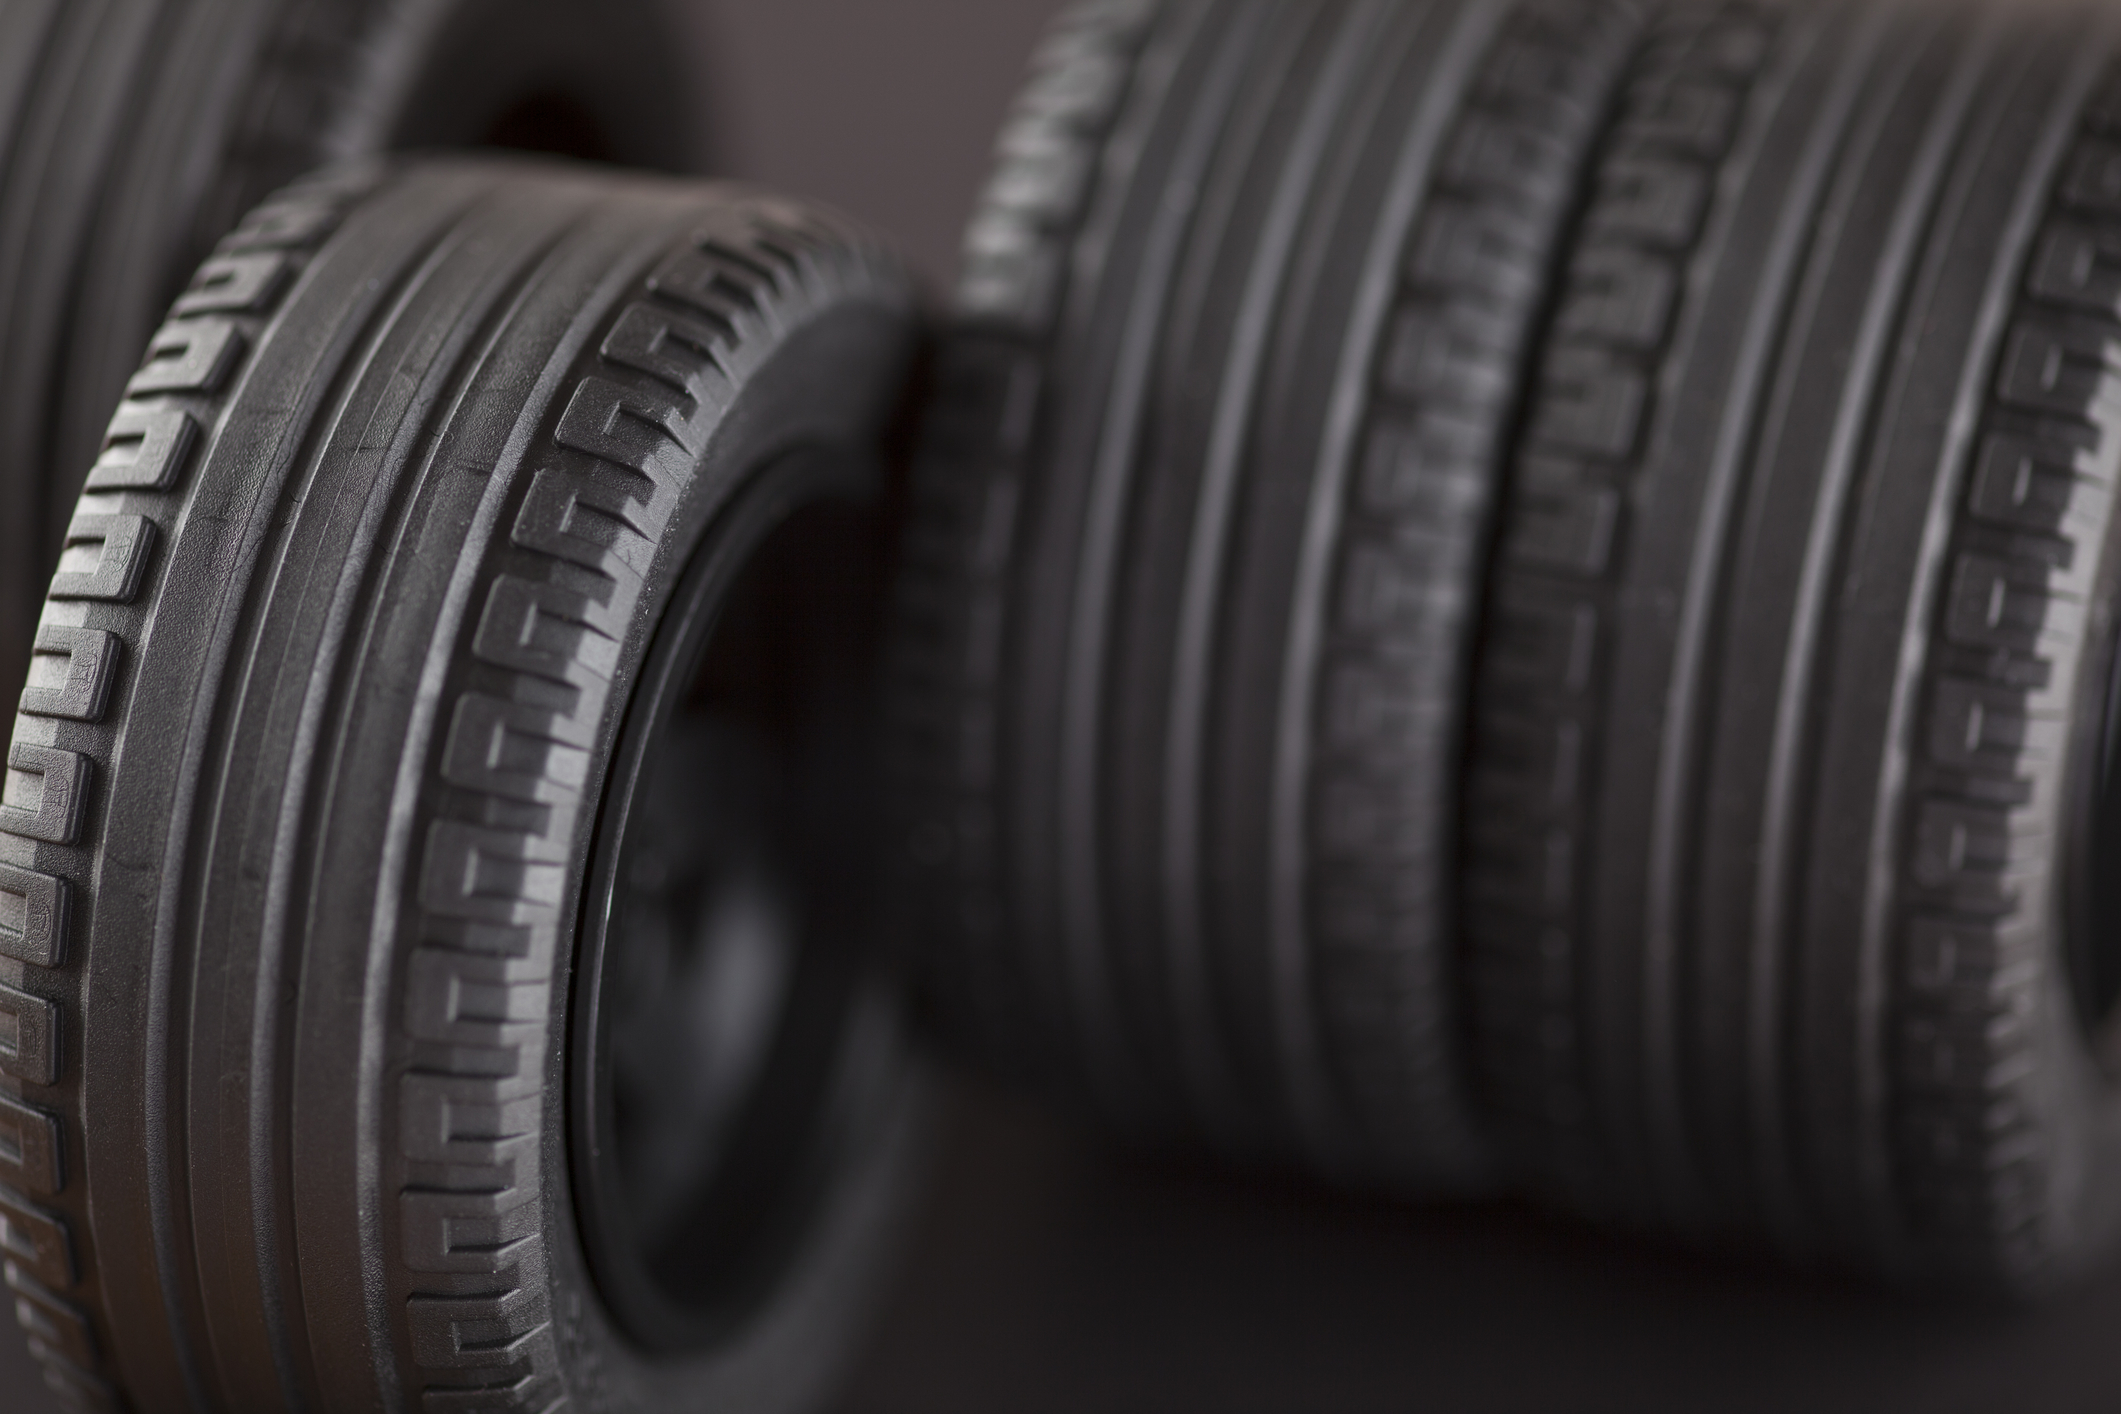 10 great discounts on tires right now!